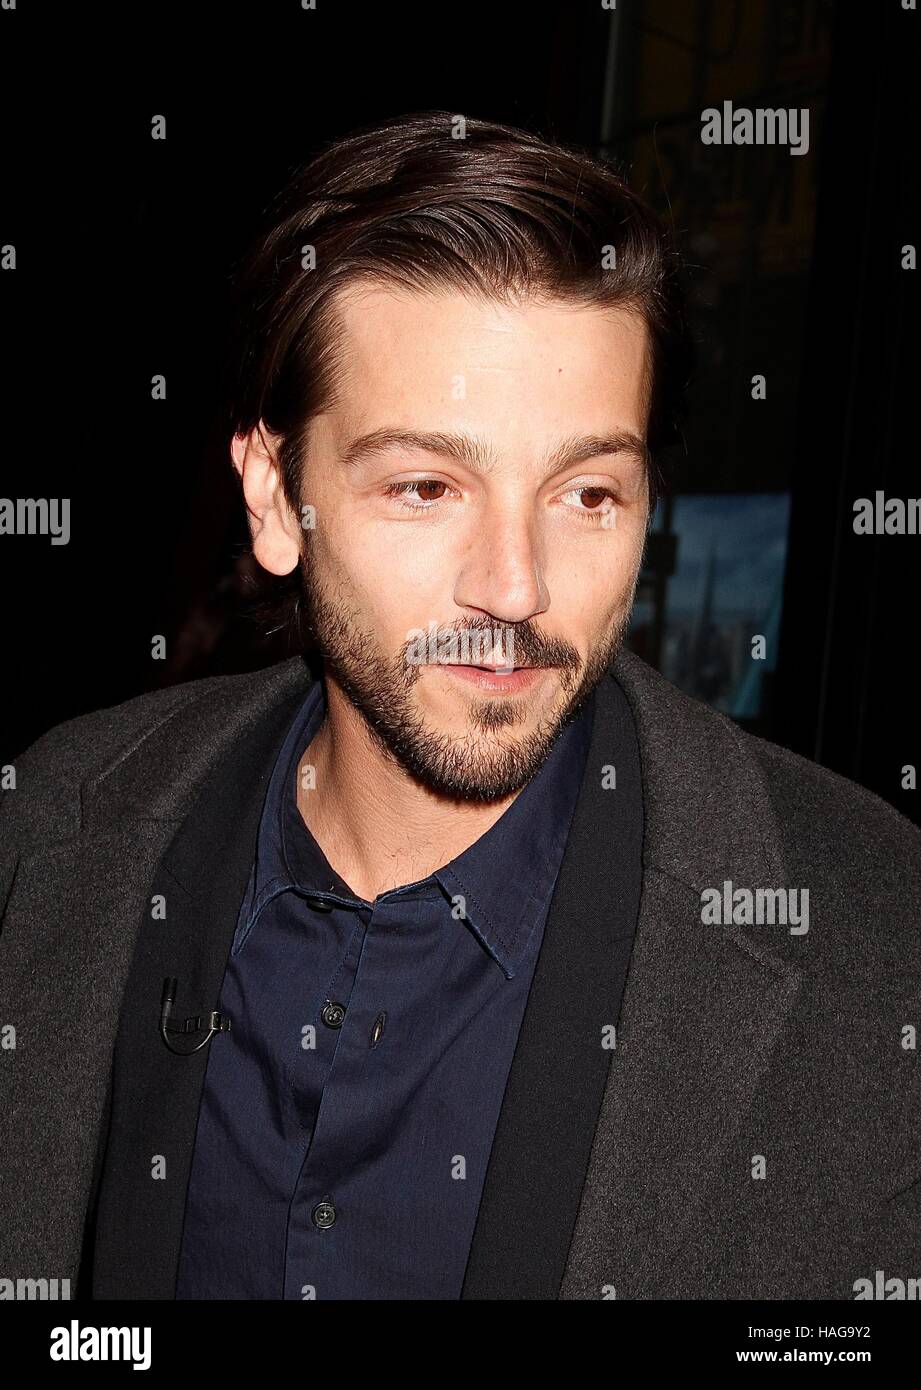 New York, NY, USA. 30th Nov, 2016. Mexican actor Diego Luna visits 'Good Morning America' to promote the movie 'Rogue One: A Star Wars Story' in New York, New York on November 30, 2016. Credit:  Rainmaker Photo/Media Punch/Alamy Live News Stock Photo